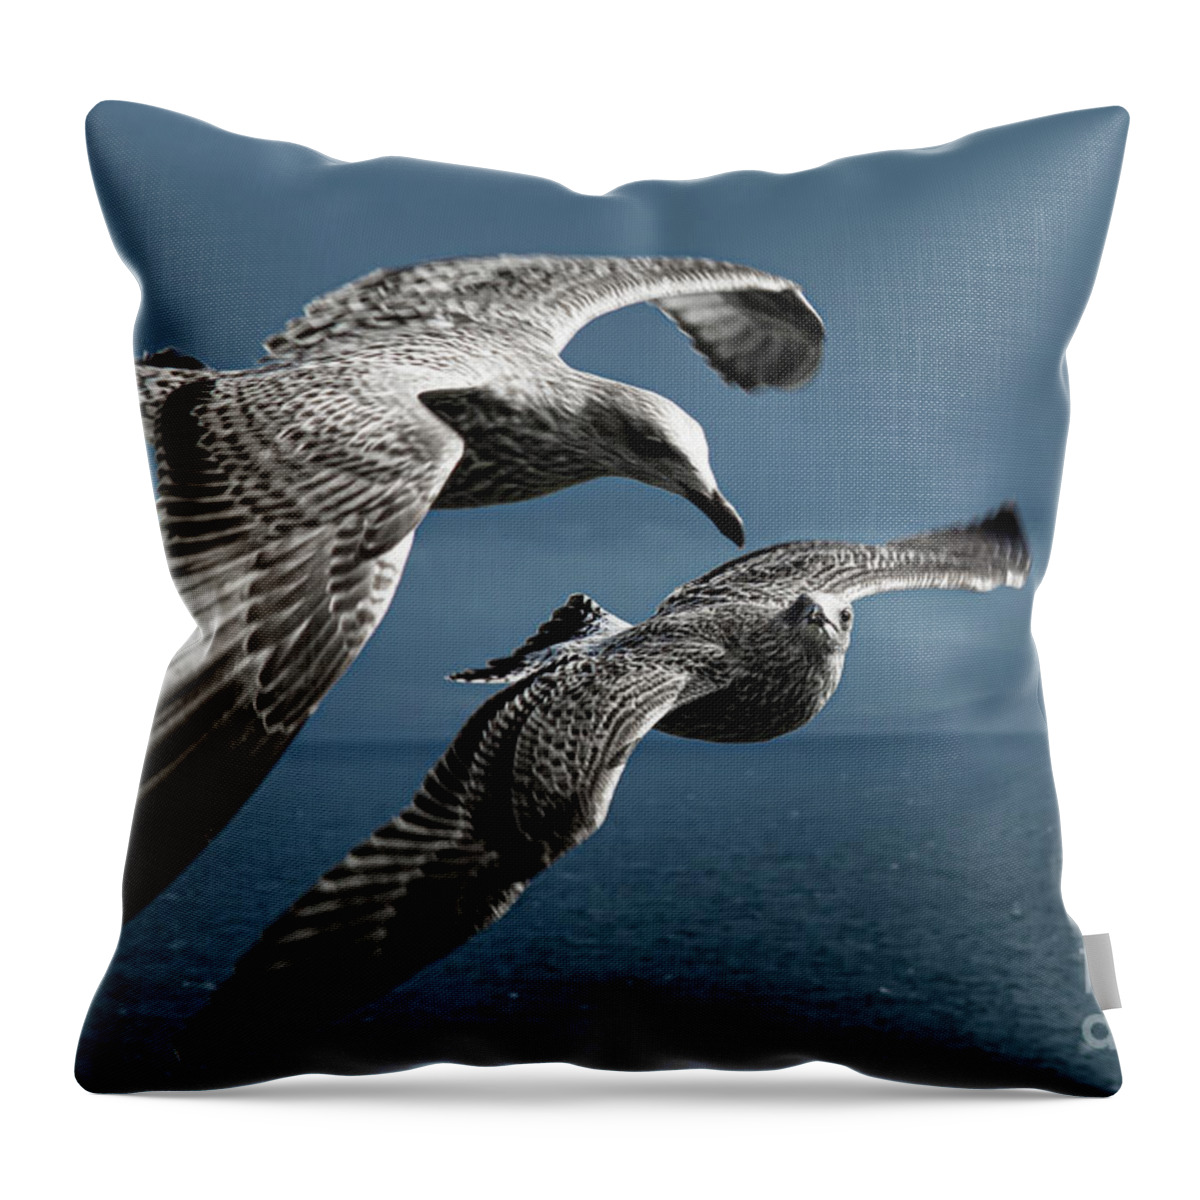 Bird Throw Pillow featuring the photograph Seagulls Flying Formation by Andreas Berthold